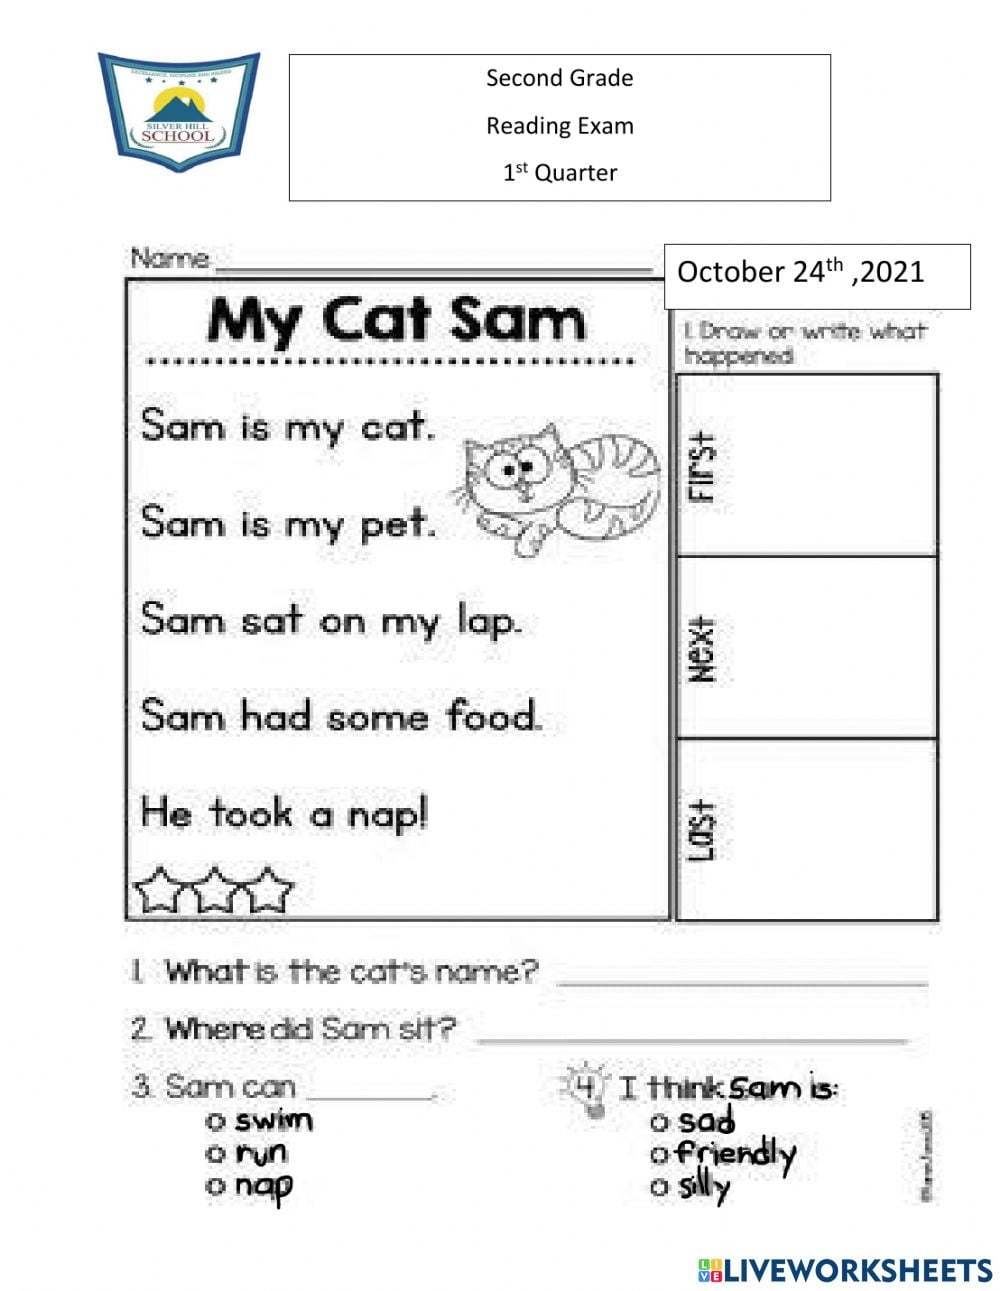 Reading Test Online Exercise For Second Grade